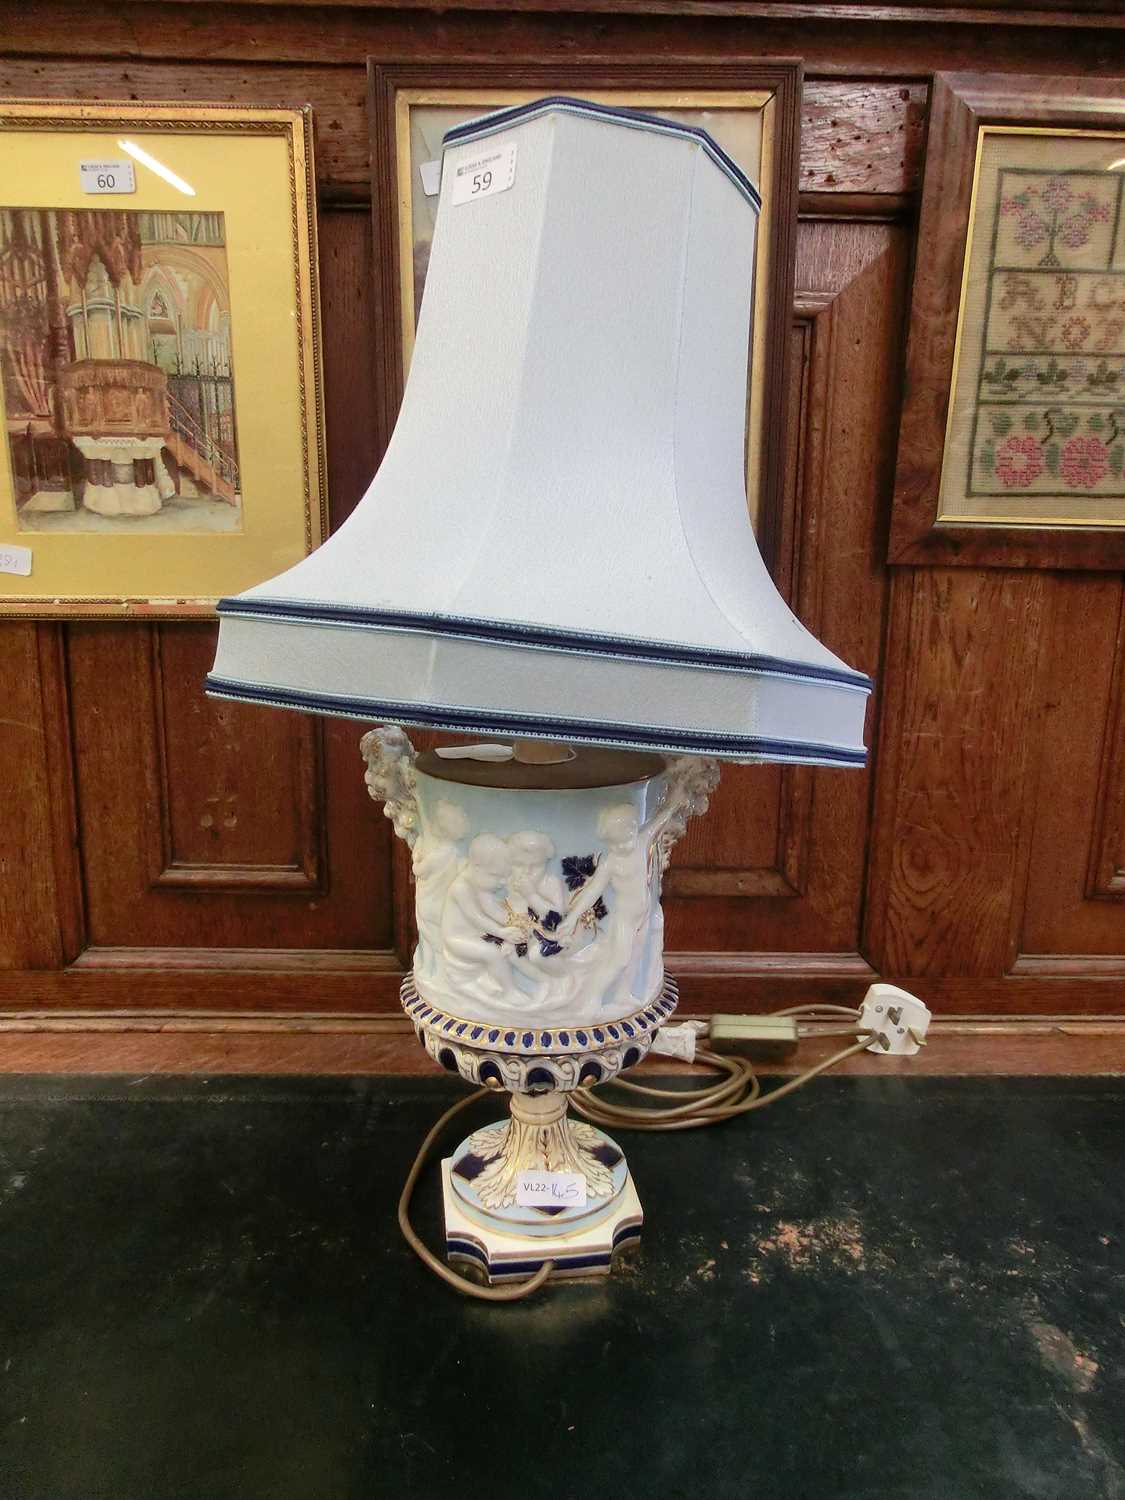 A ceramic columned table lamp with putto design